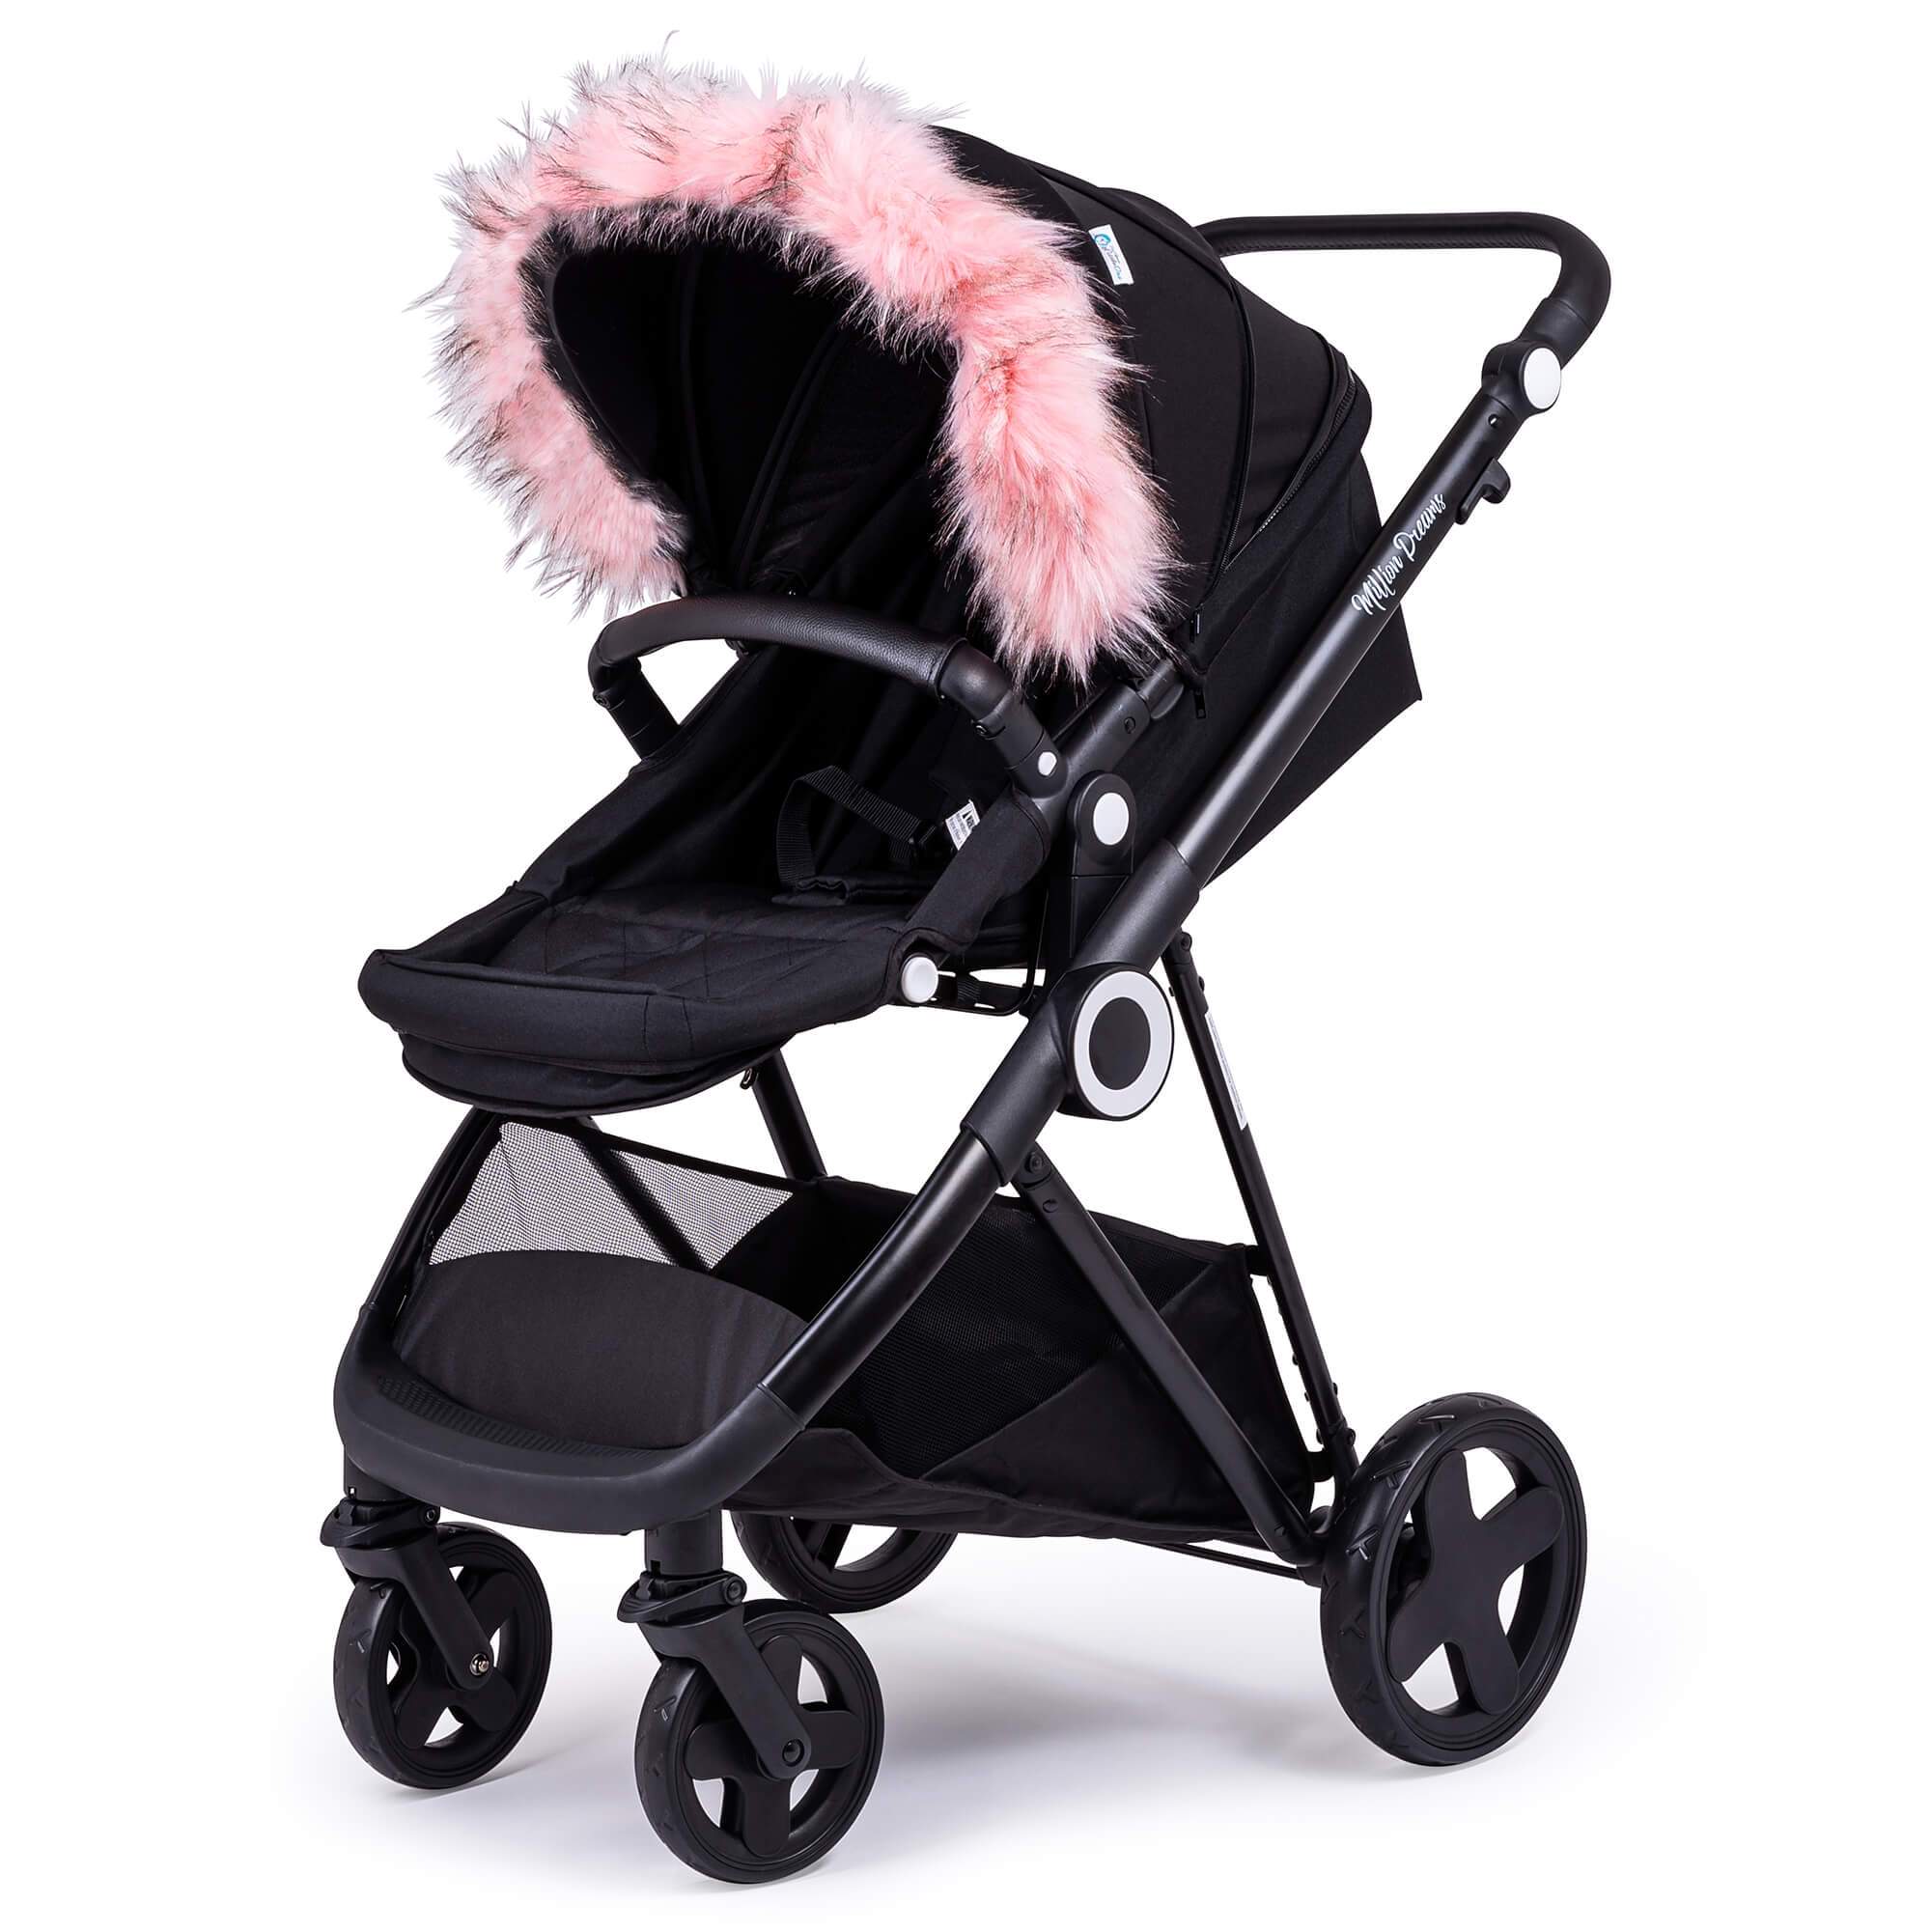 Pram Fur Hood Trim Attachment for Pushchair Compatible with Easywalker - Light Pink / Fits All Models | For Your Little One